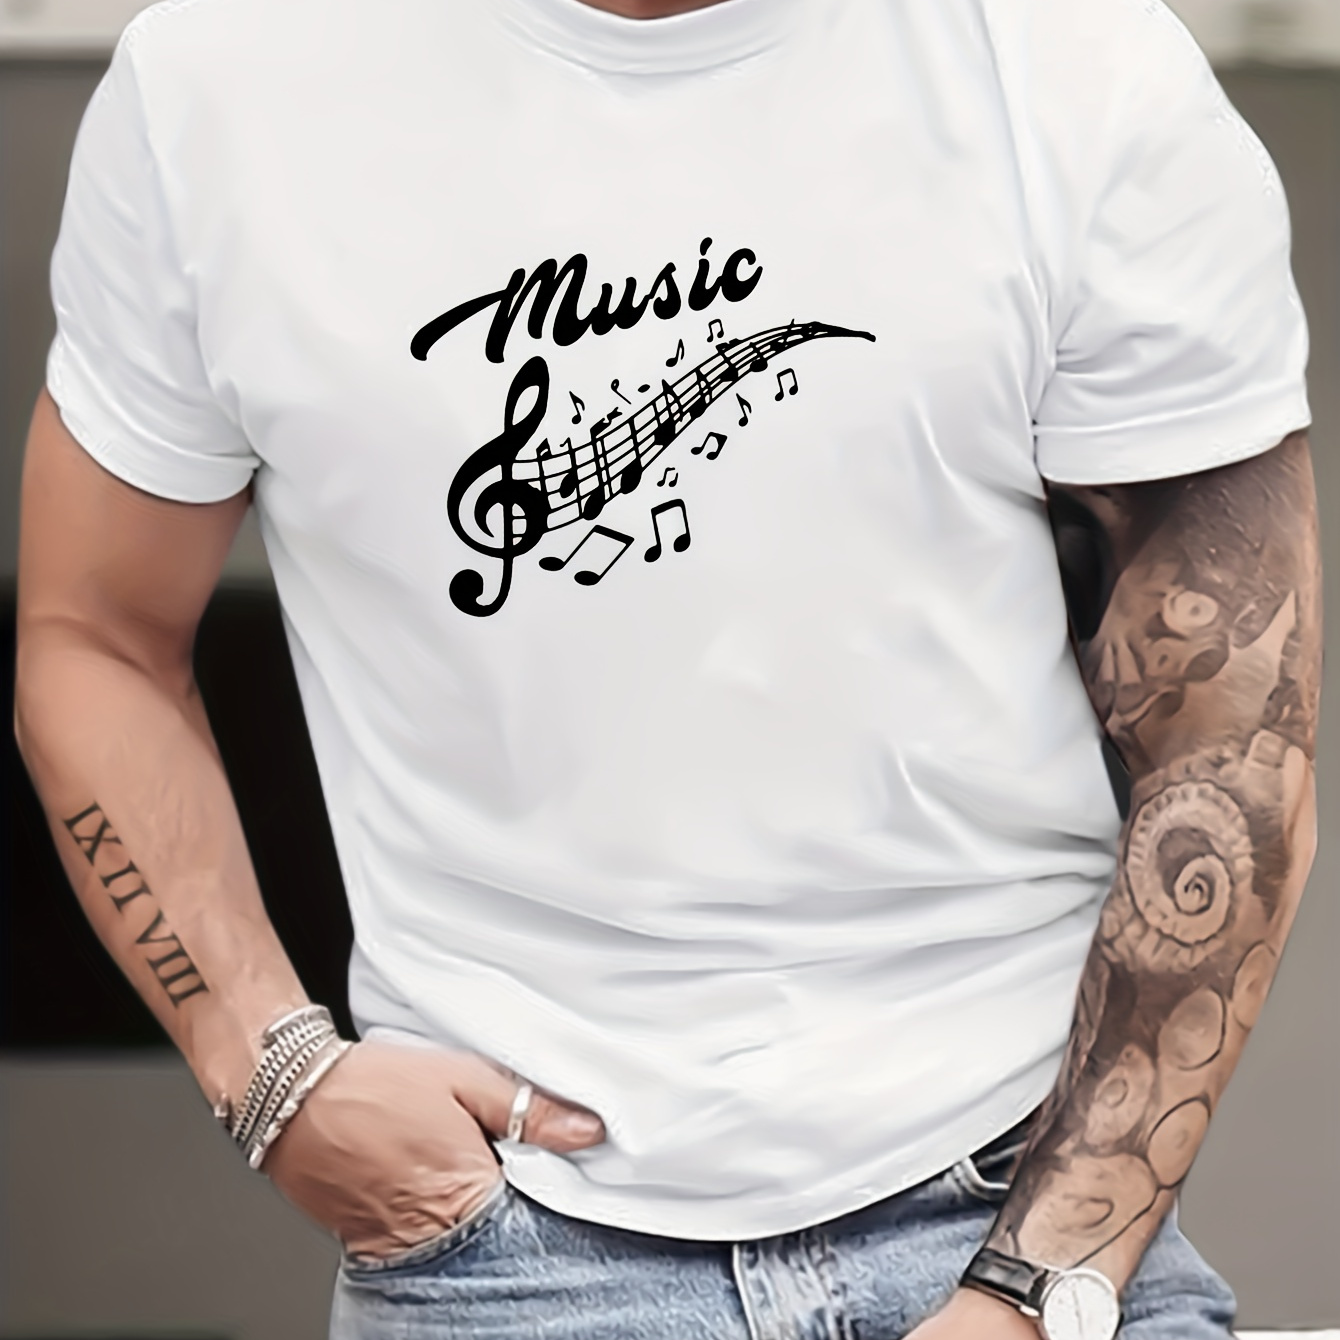 

Musical Notes Pattern Print Men's Crew Neck Short Sleeve Tees, Summer Trendy Cotton T-shirt, Casual Versatile Comfy Breathable Top For Outdoor Fitness, Holiday & Daily Commute